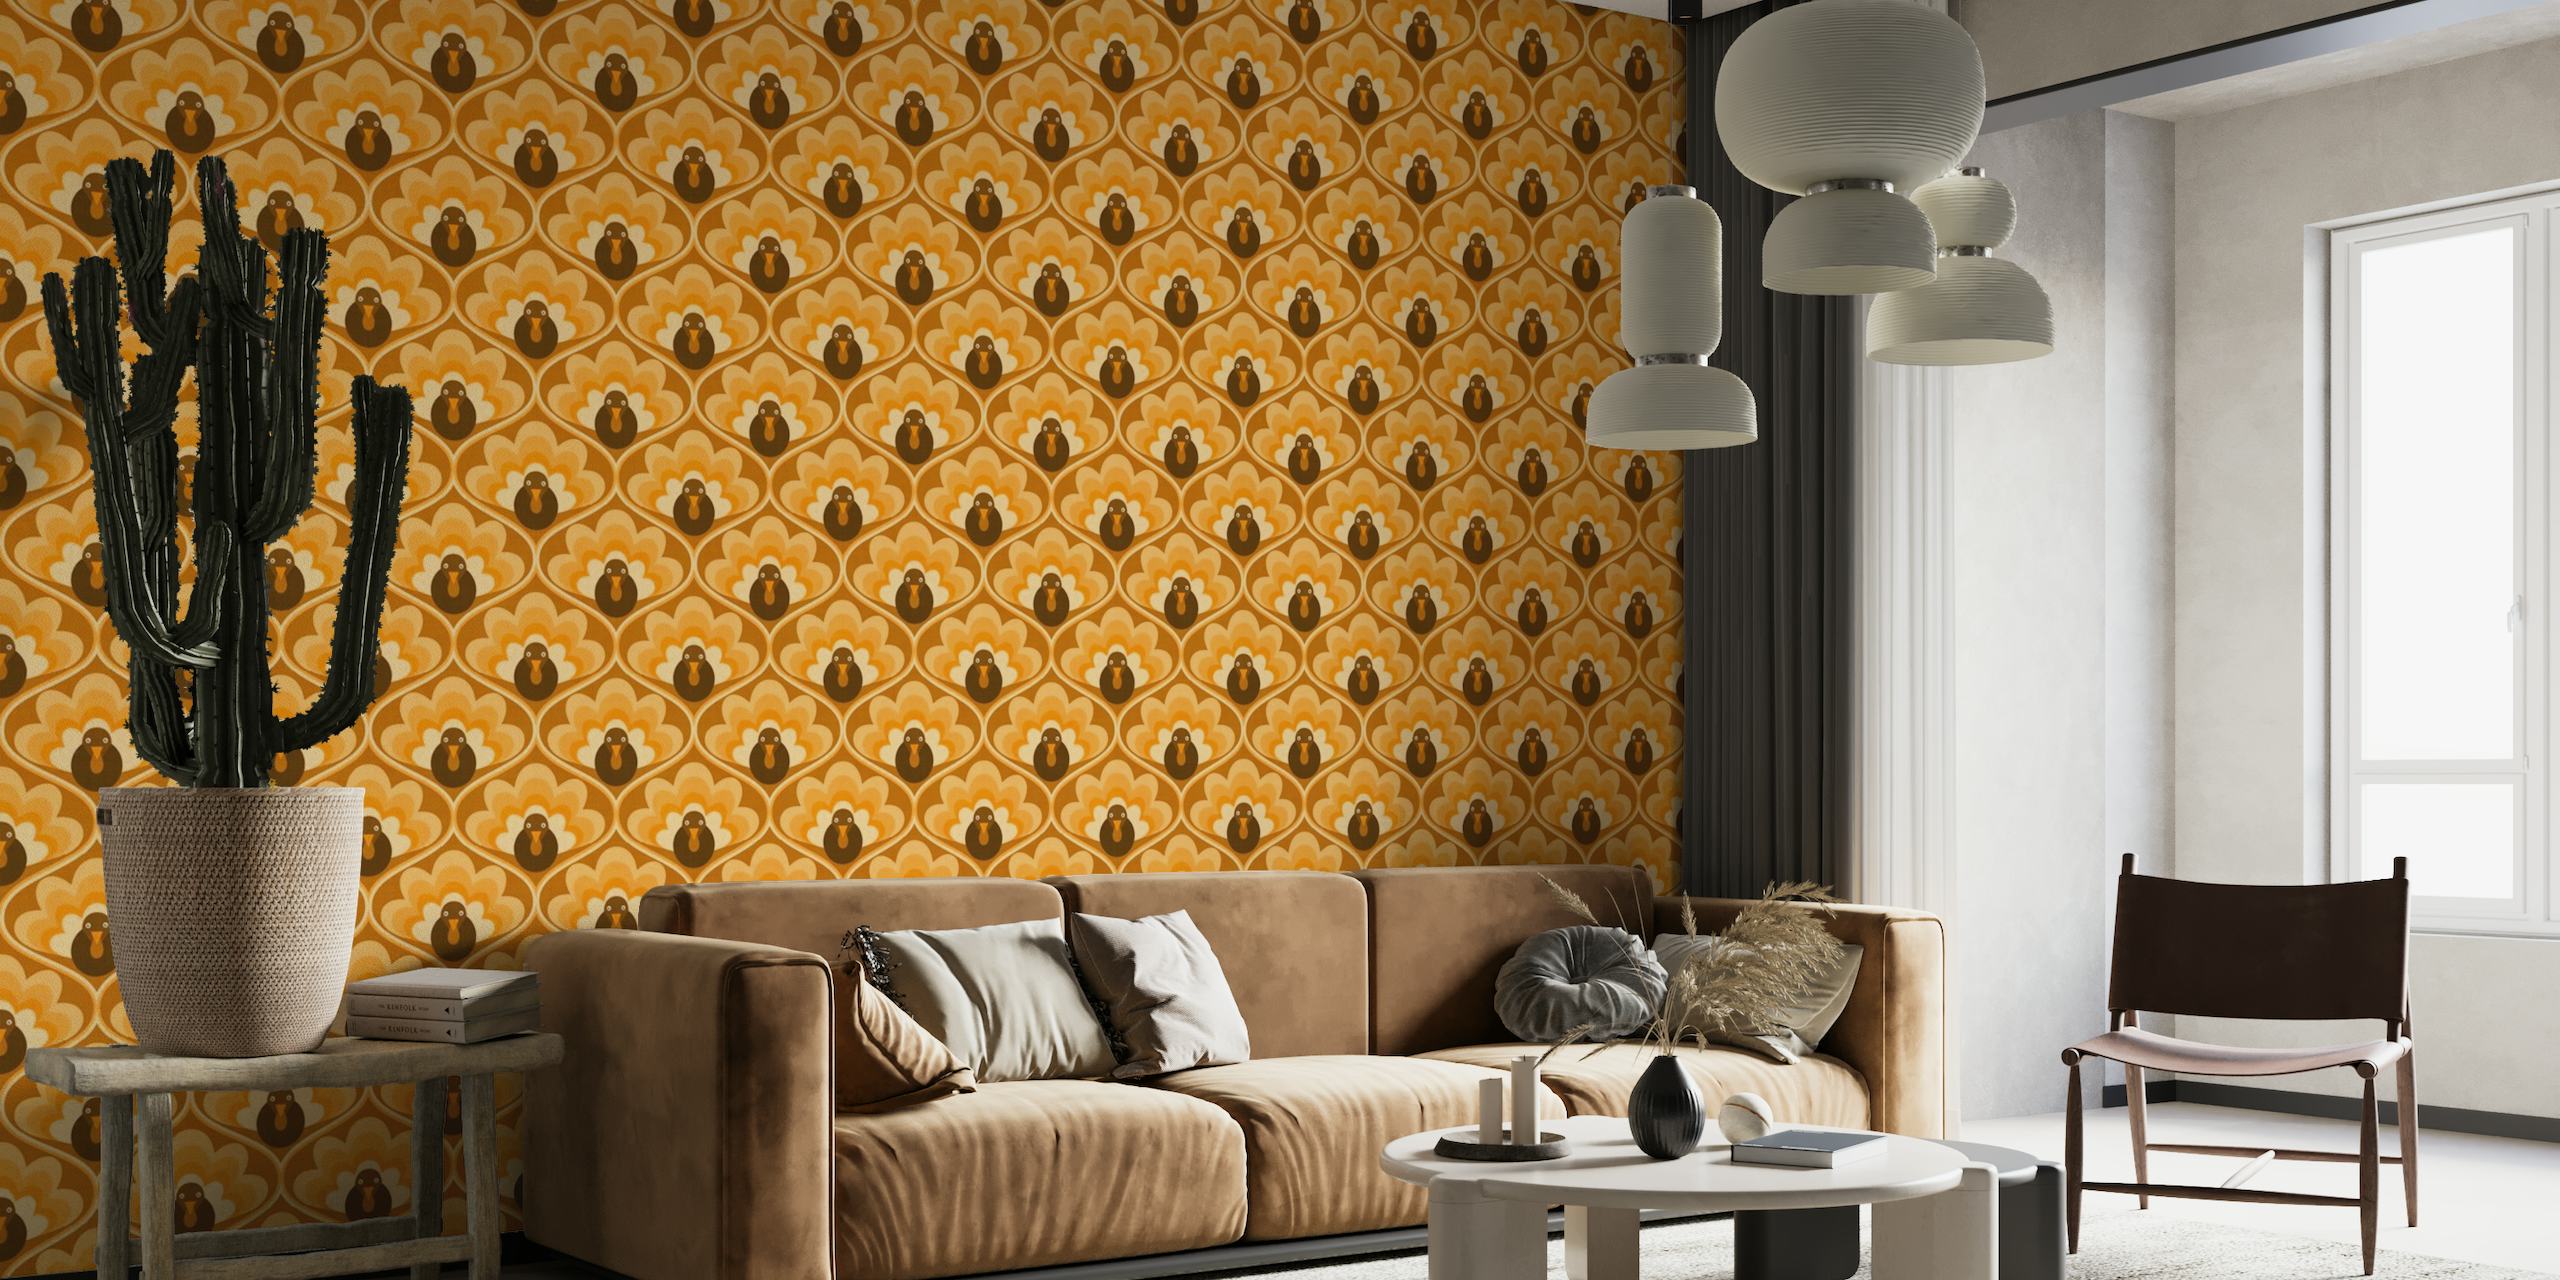 Retro-style wall mural with geometric shapes and stylized birds in brown, orange, and cream